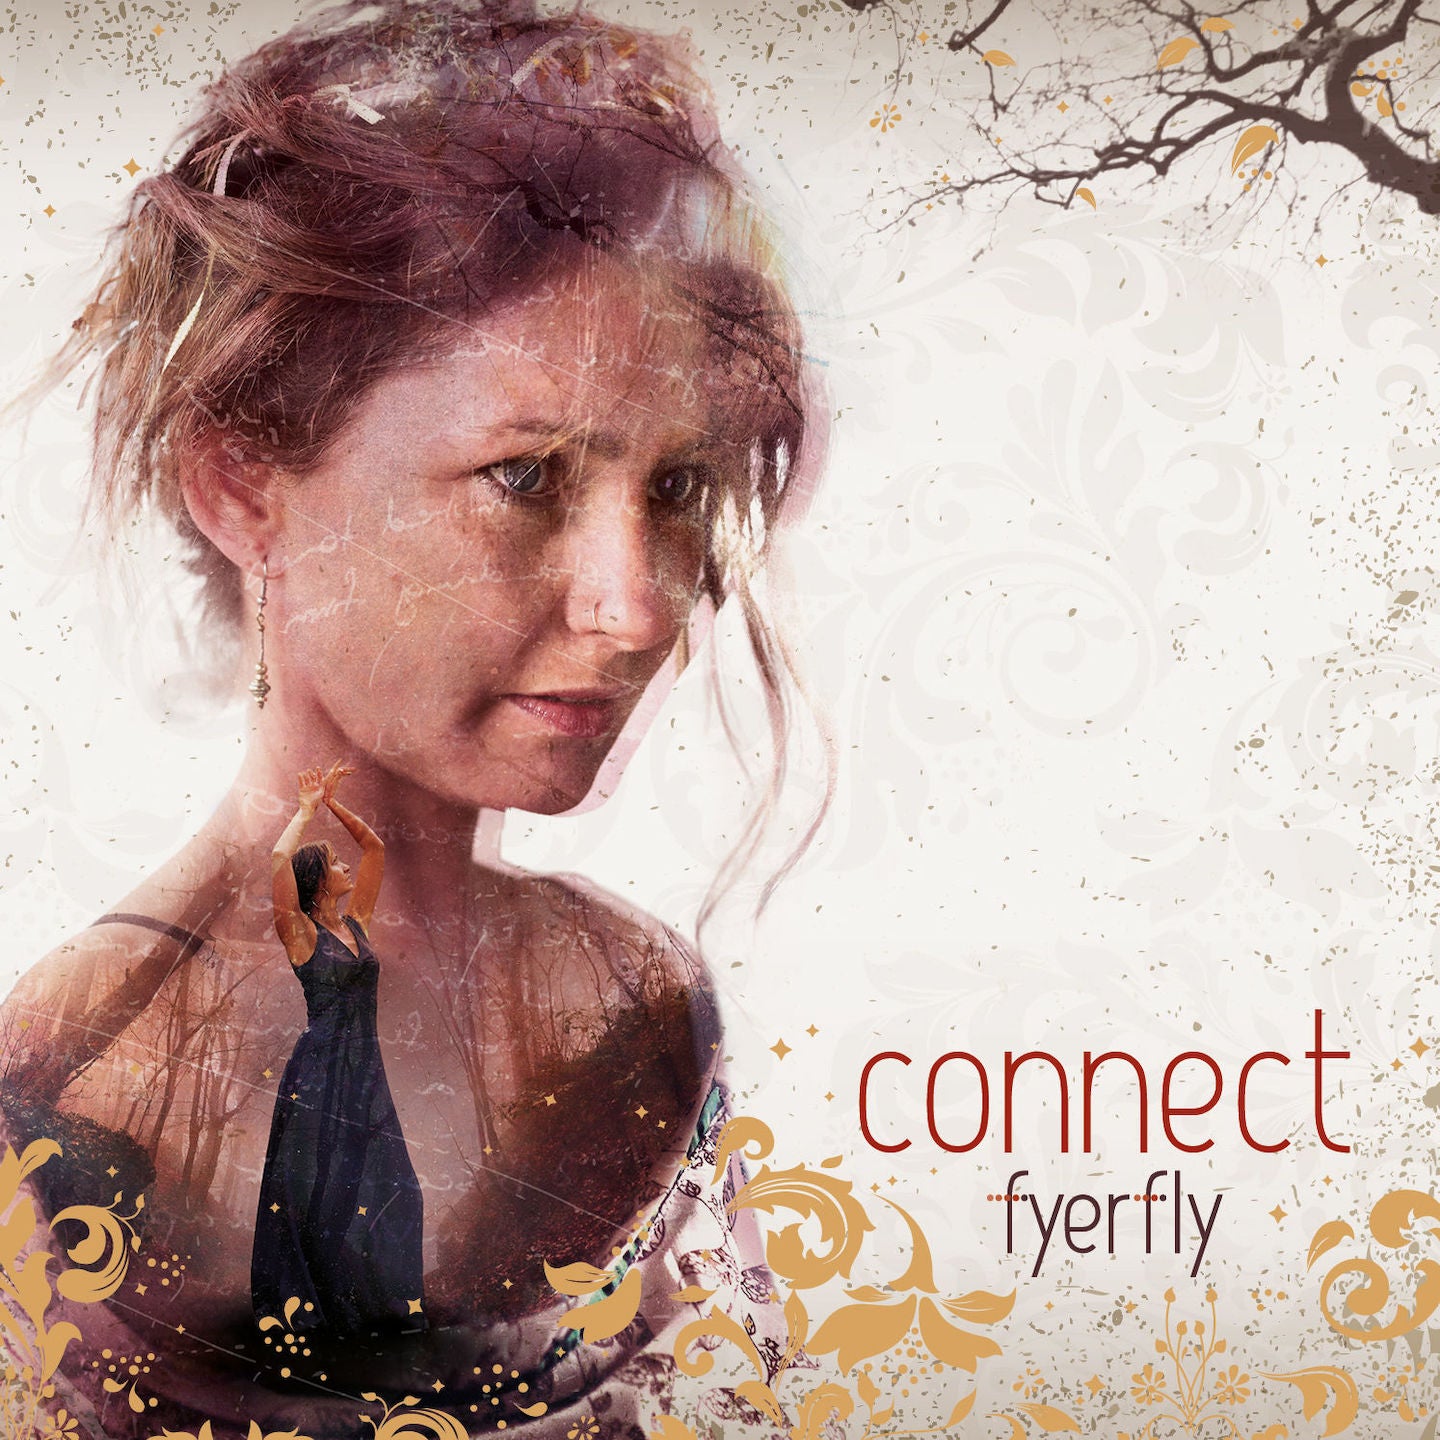 Beautiful New Day is from the album 'Connect' by Fyerfly. Infusing elements of Alt Rock, Sadcore, Jazz and Blues, this deeply intimate and sultry album will soothe you as your soul is immersed in its serene and haunting sounds. It’s a beautiful day yet she’s still discontent. Darkness turns to light as she finds her direction. Slow and dreamy track with operatic backing vocals, industrial instrumental outro, and hypnotic groove. 